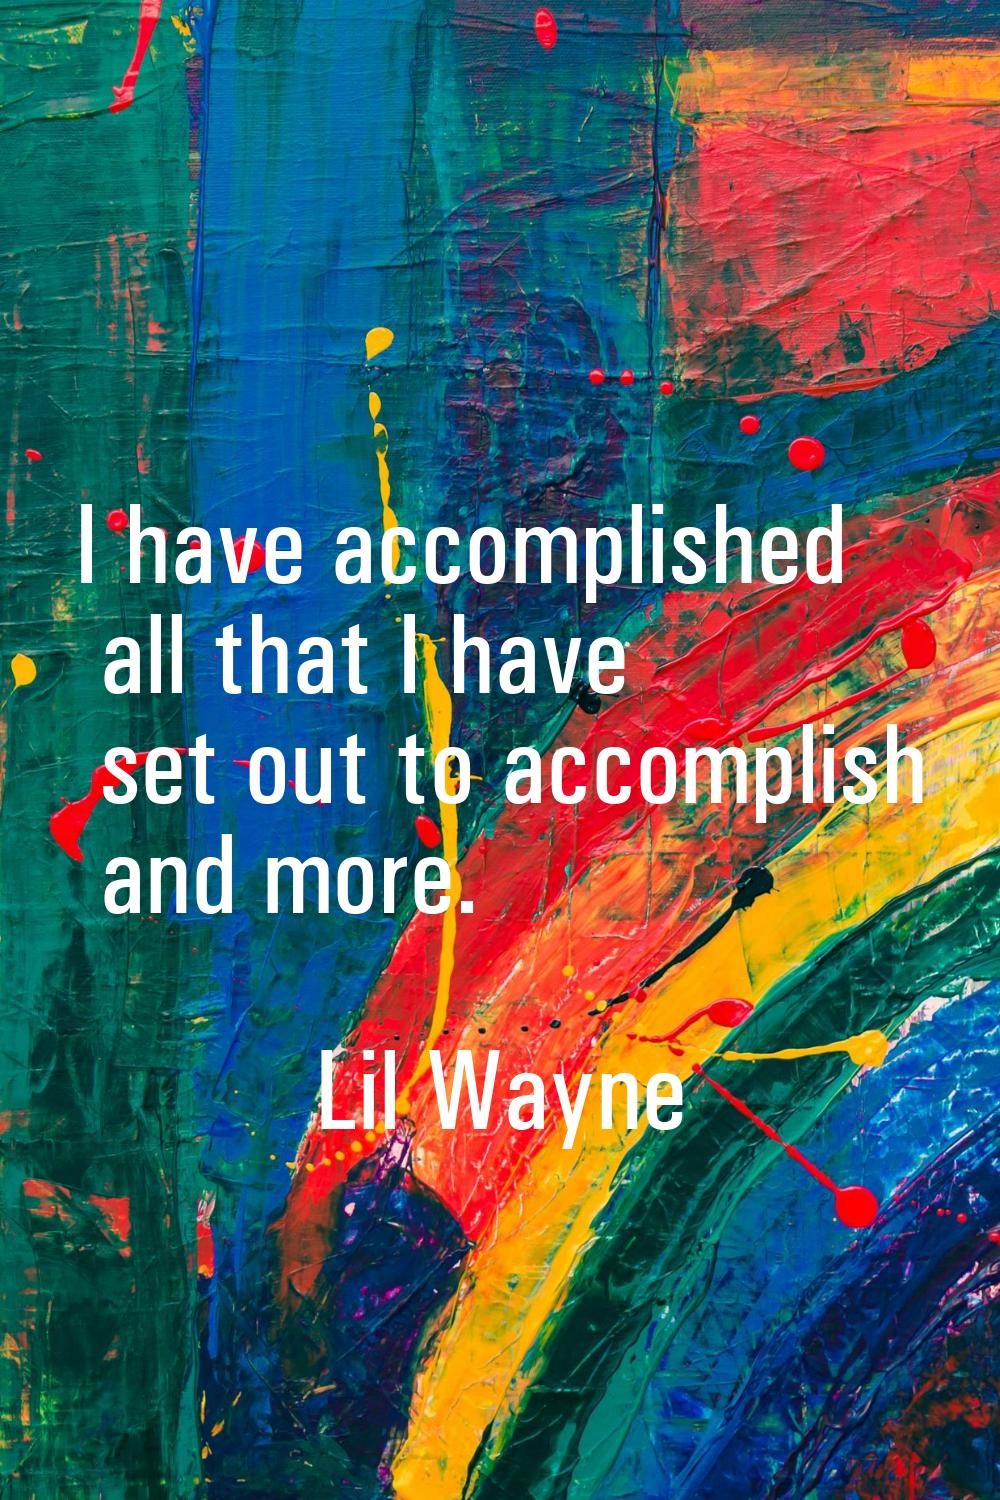 I have accomplished all that I have set out to accomplish and more.